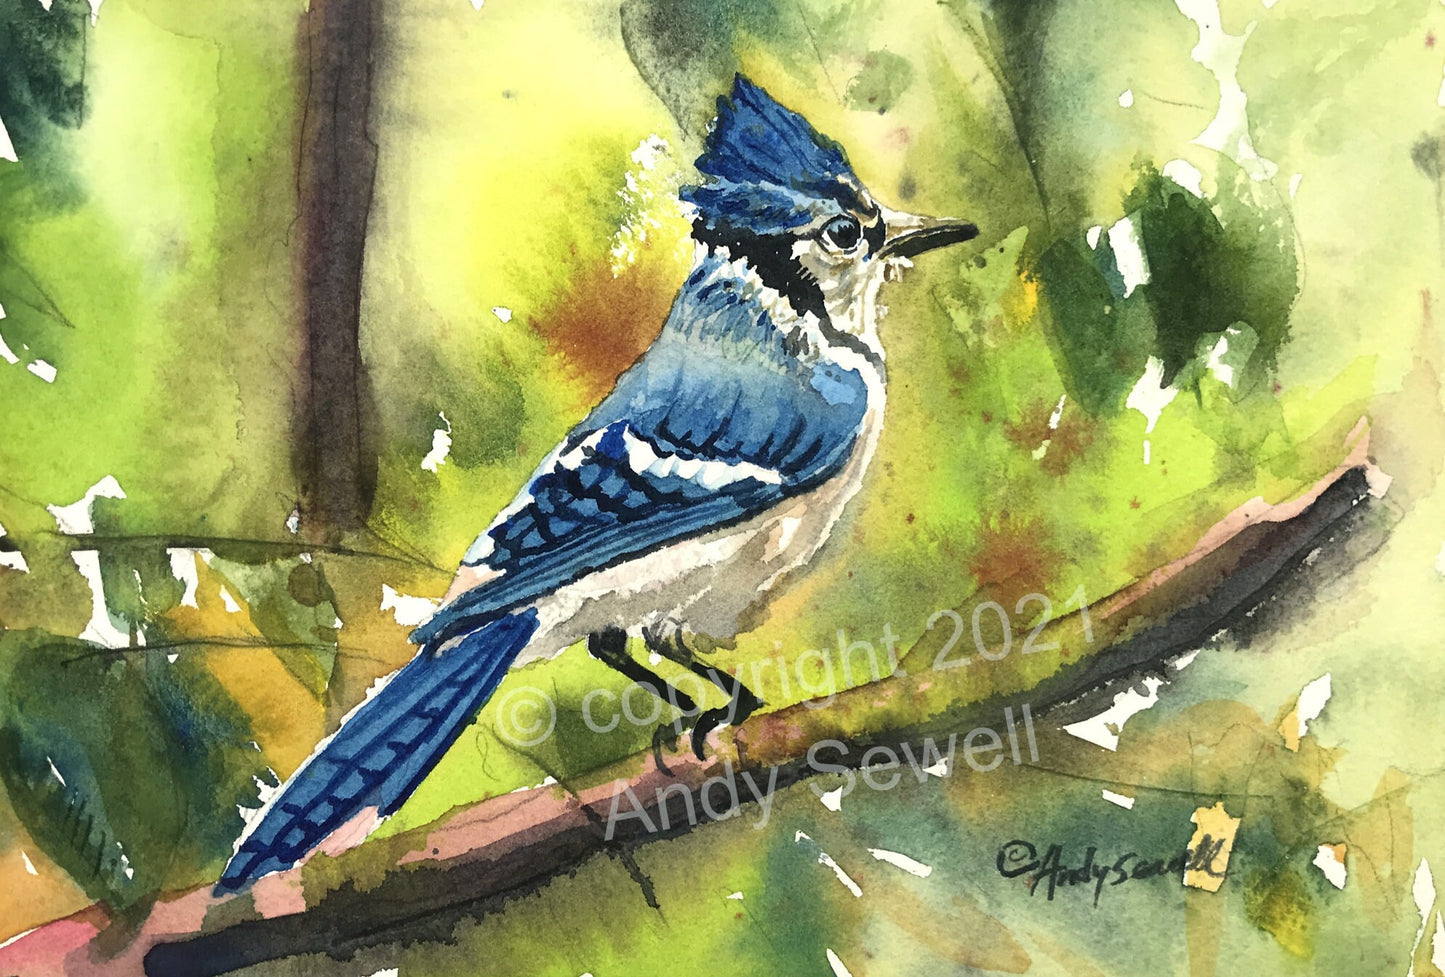 Blue Jay - Blue Jay Watercolor signed Print or Original watercolor painting by Andy Sewell